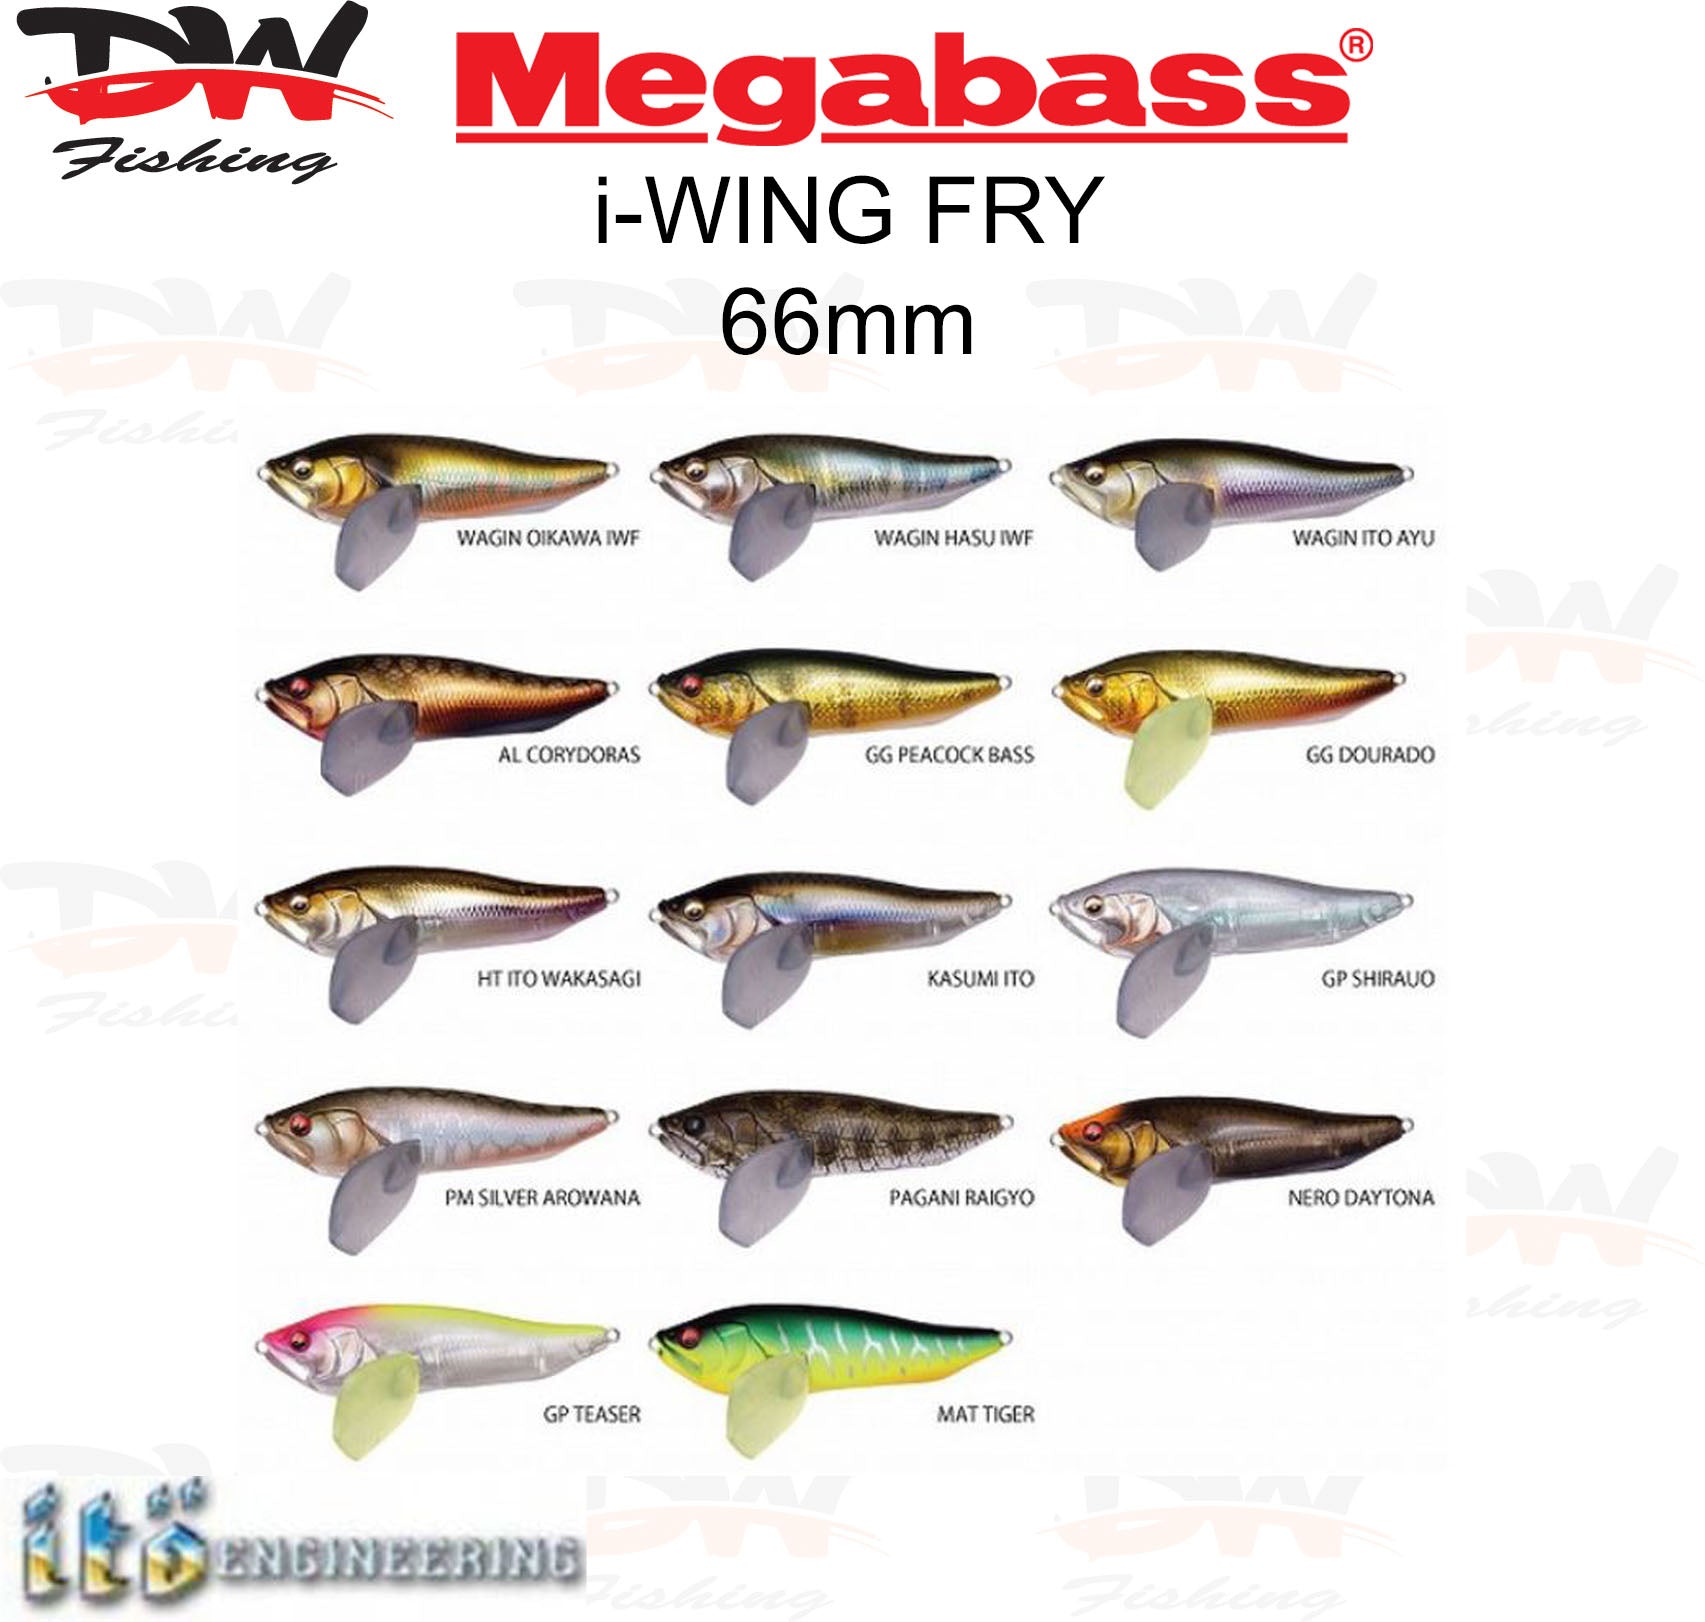 Megabass i-WING FRY surface lure colour chart